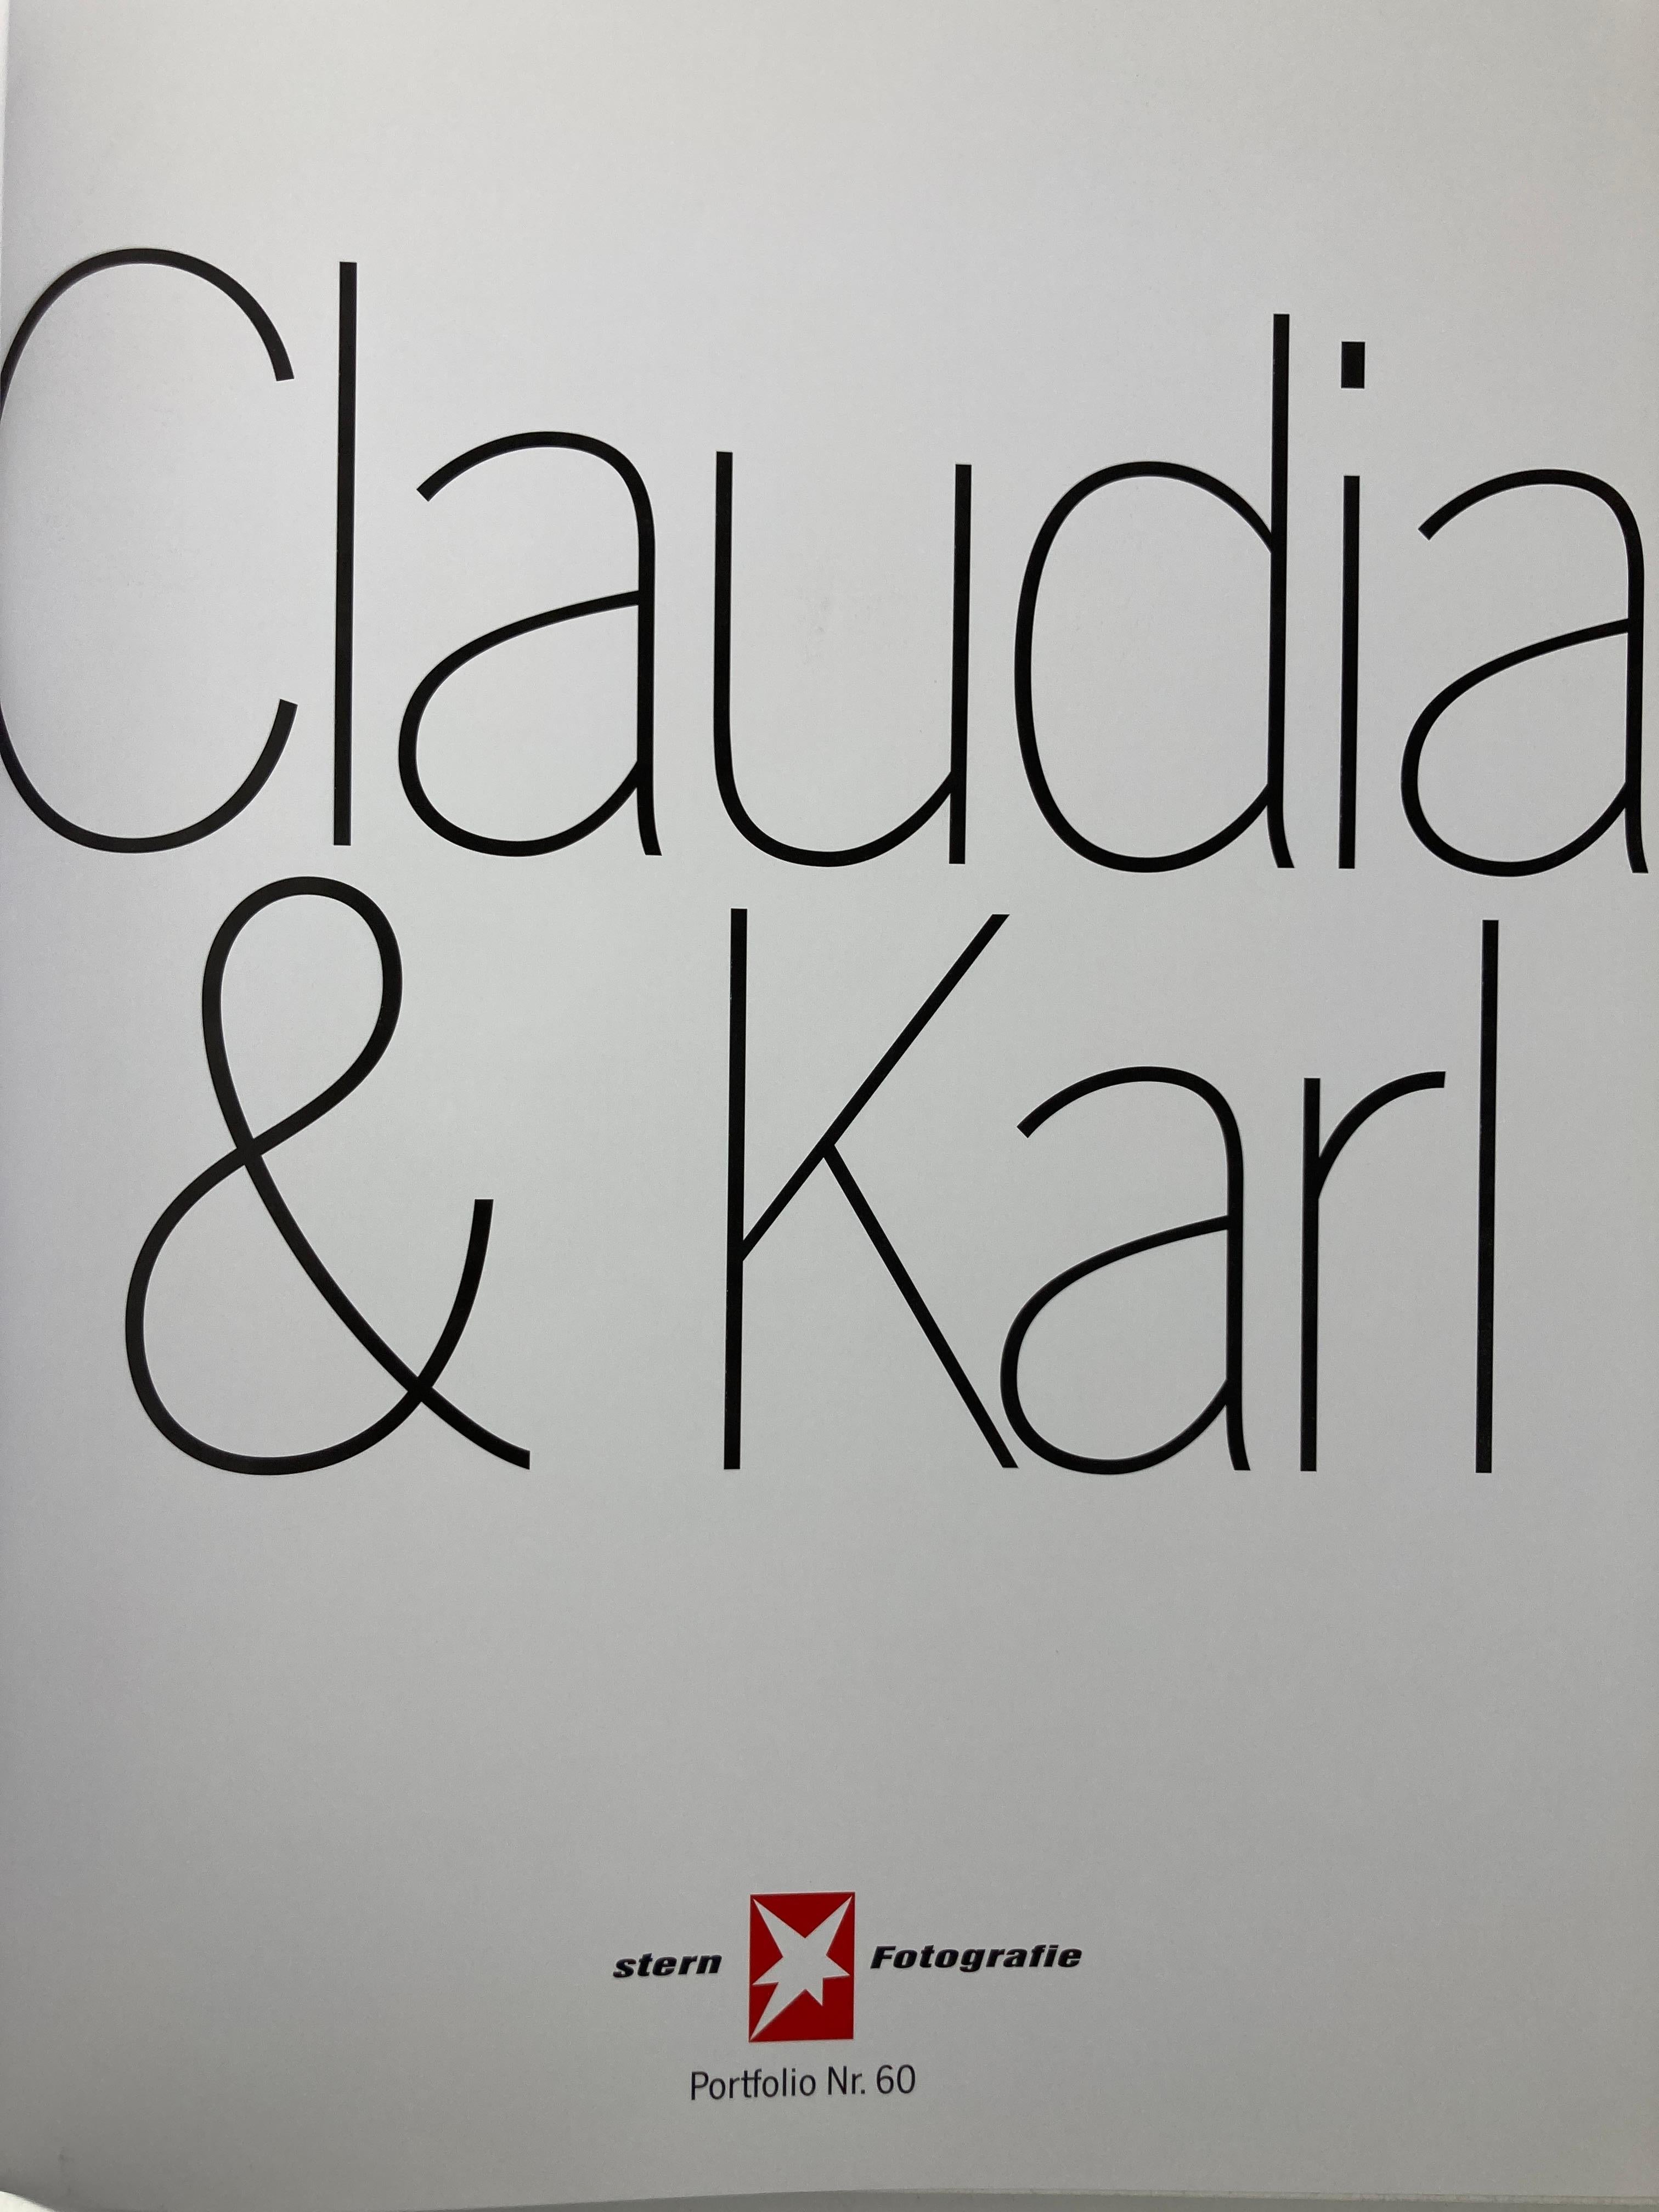 Claudia and Karl Hardcover Book Portfolio No. 60 1st Ed. by Karl Lagerfeld 9